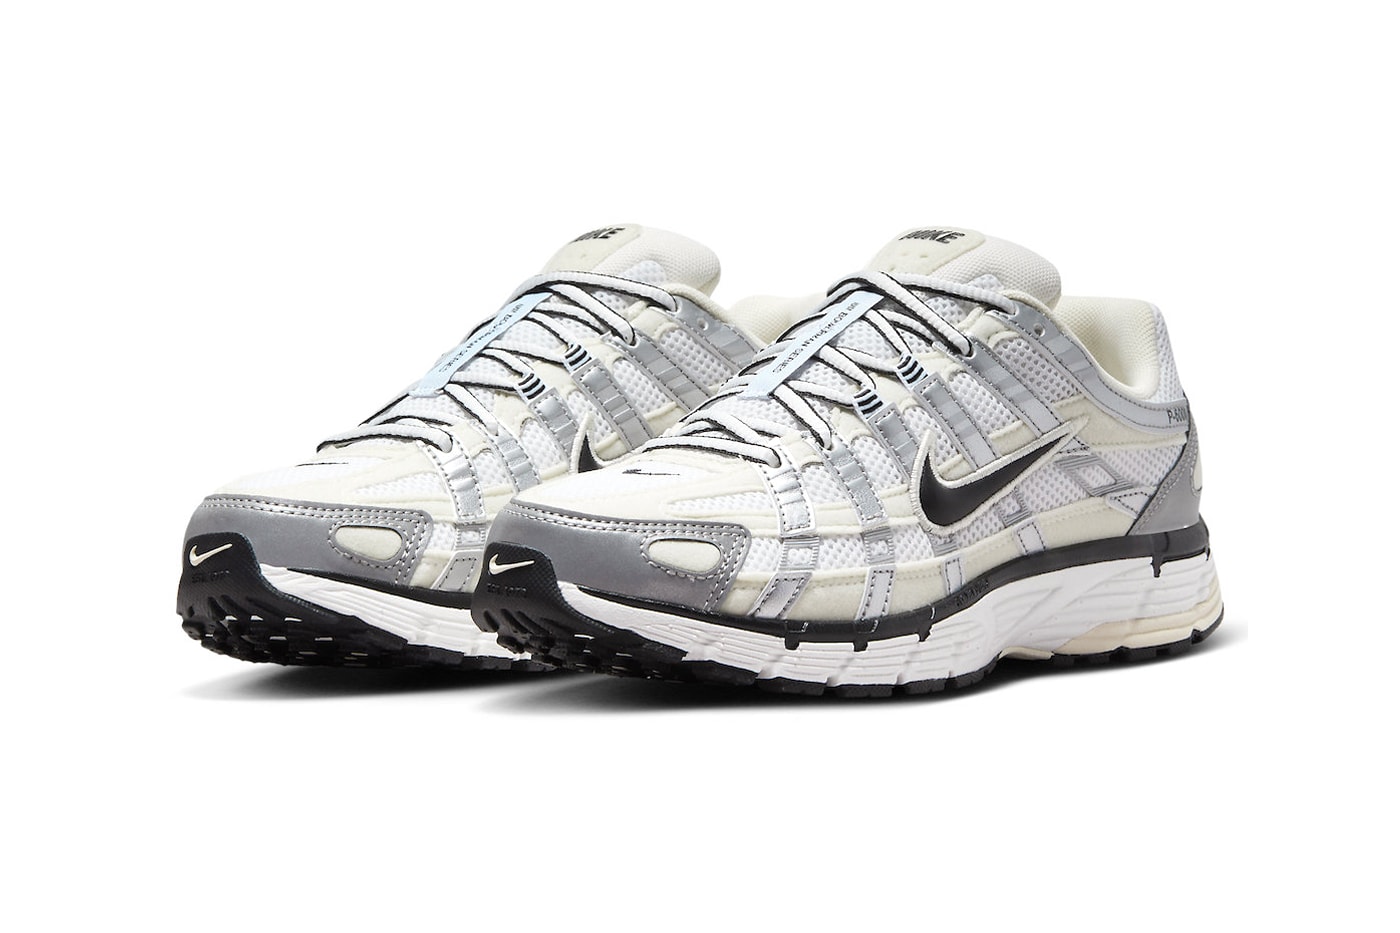 Nike P-6000 Arrives in Coconut Milk and Metallic Silver FV6603-100 technical sneakers swoosh shoes